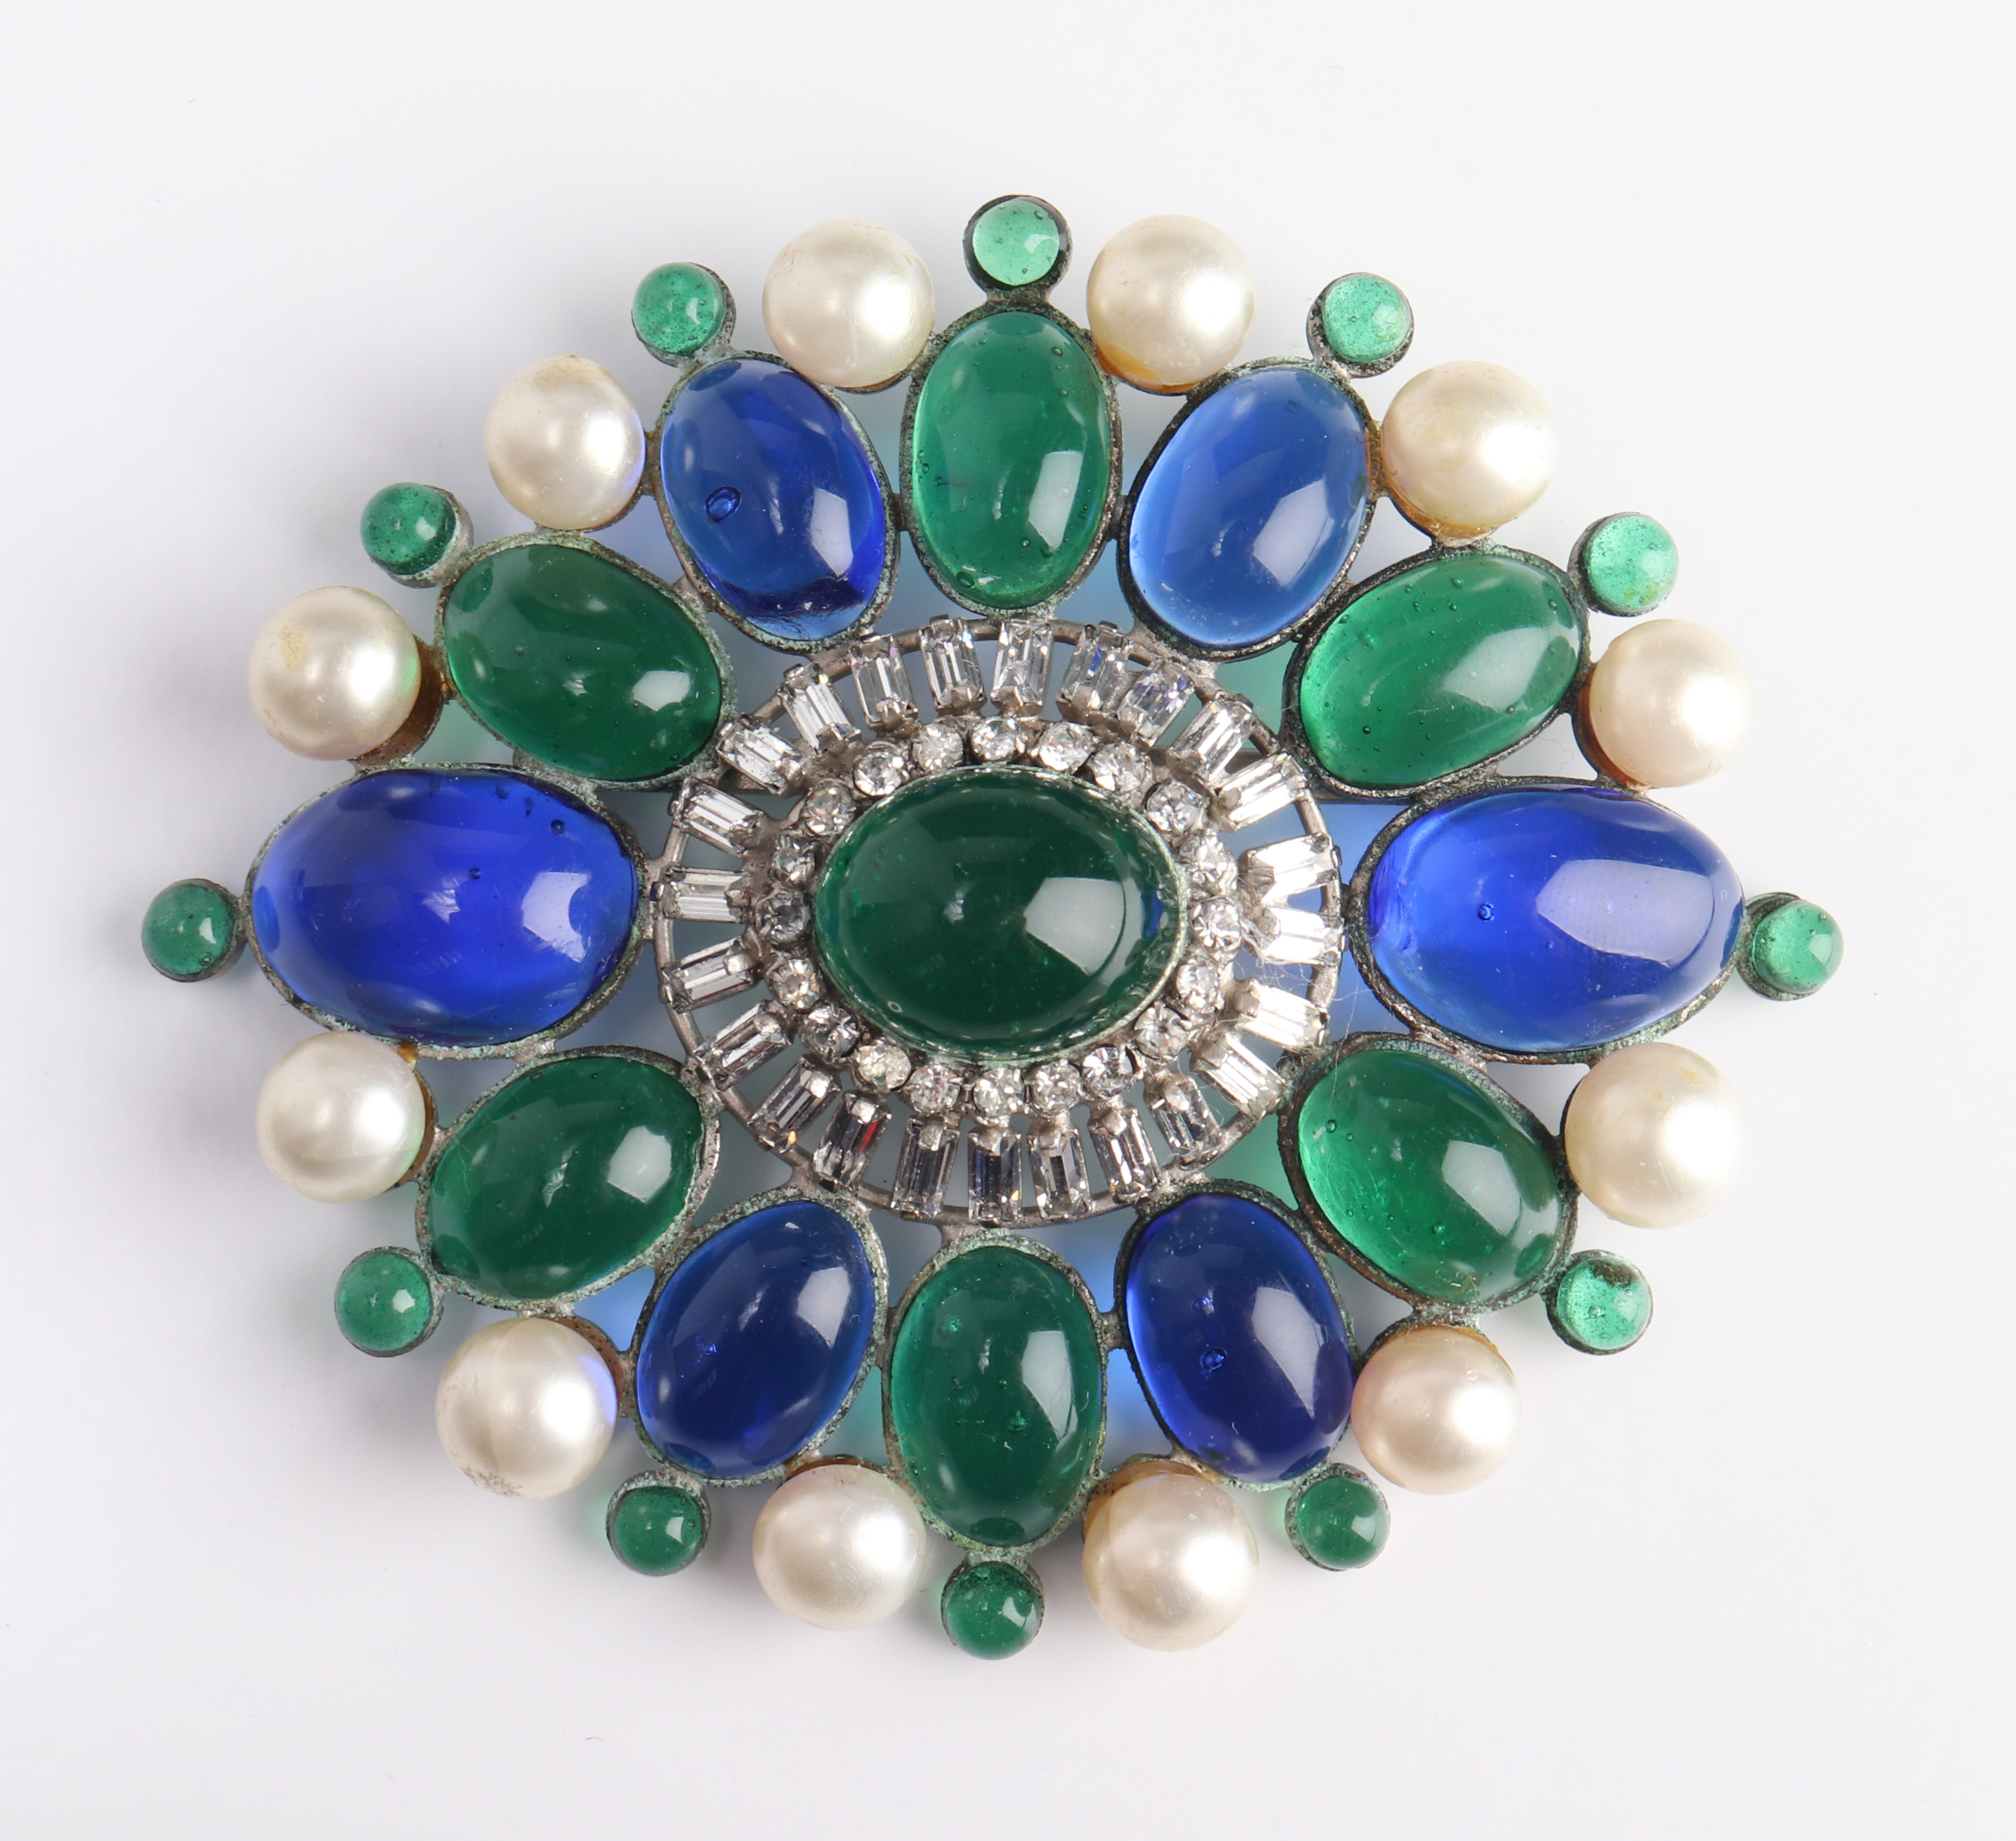 CHANEL VINTAGE BROOCH WITH GRIPOIX 3c2fd9